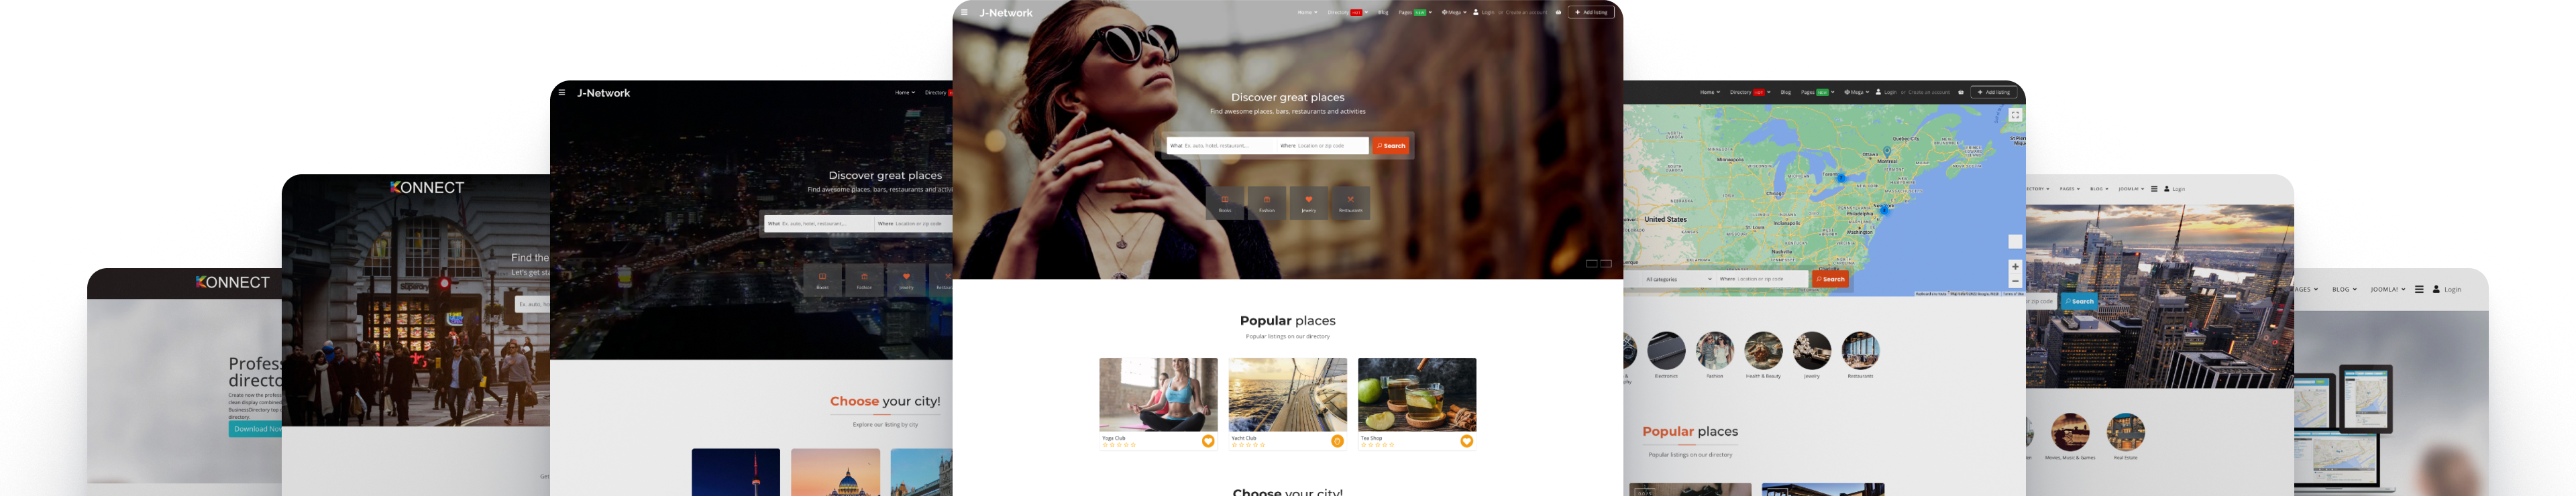 J-Network, the new Joomla template for directory websites